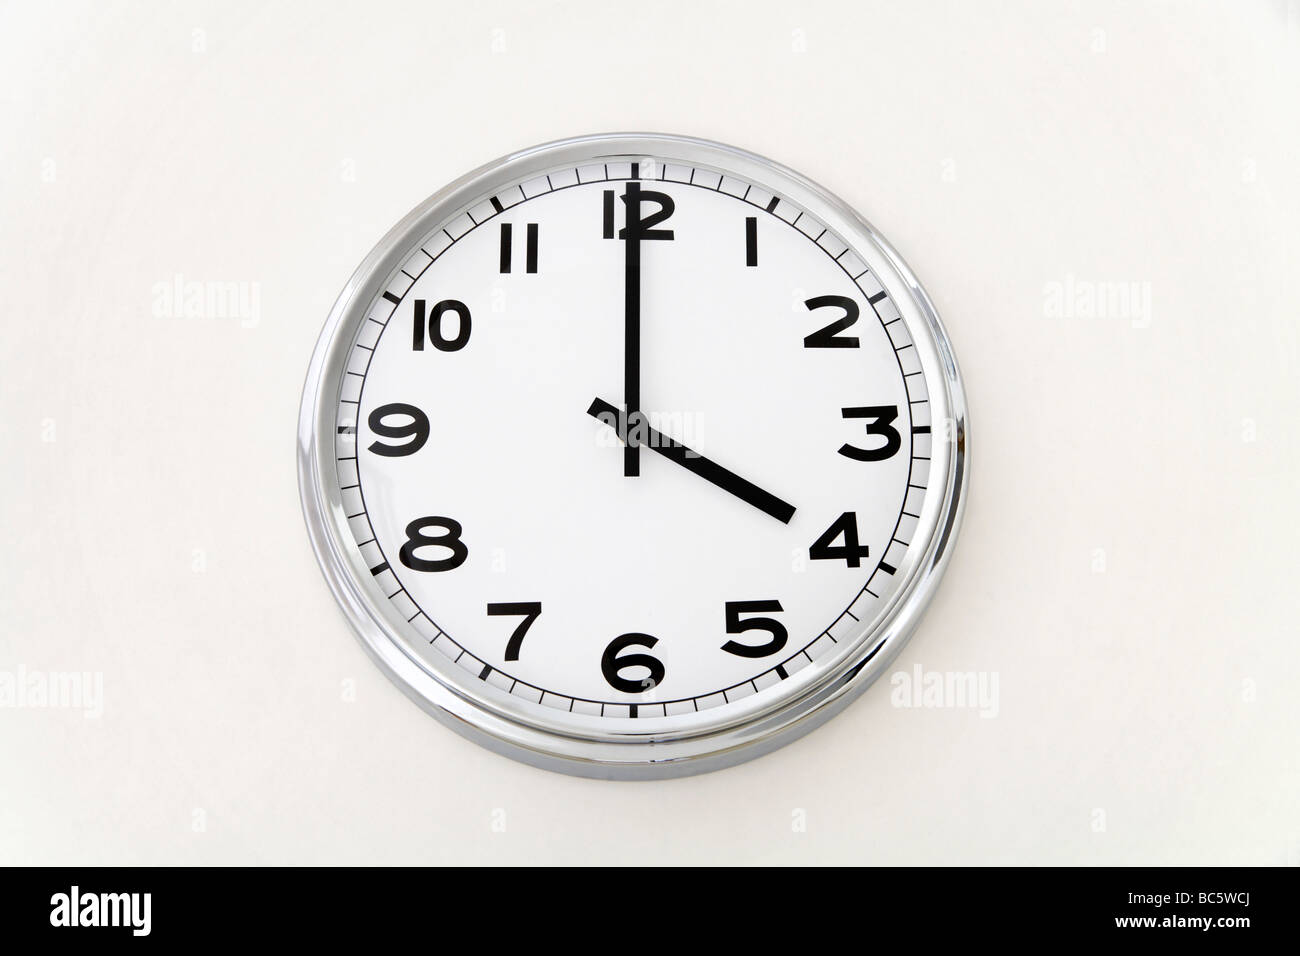 Wall clock, time measurement, close up Stock Photo